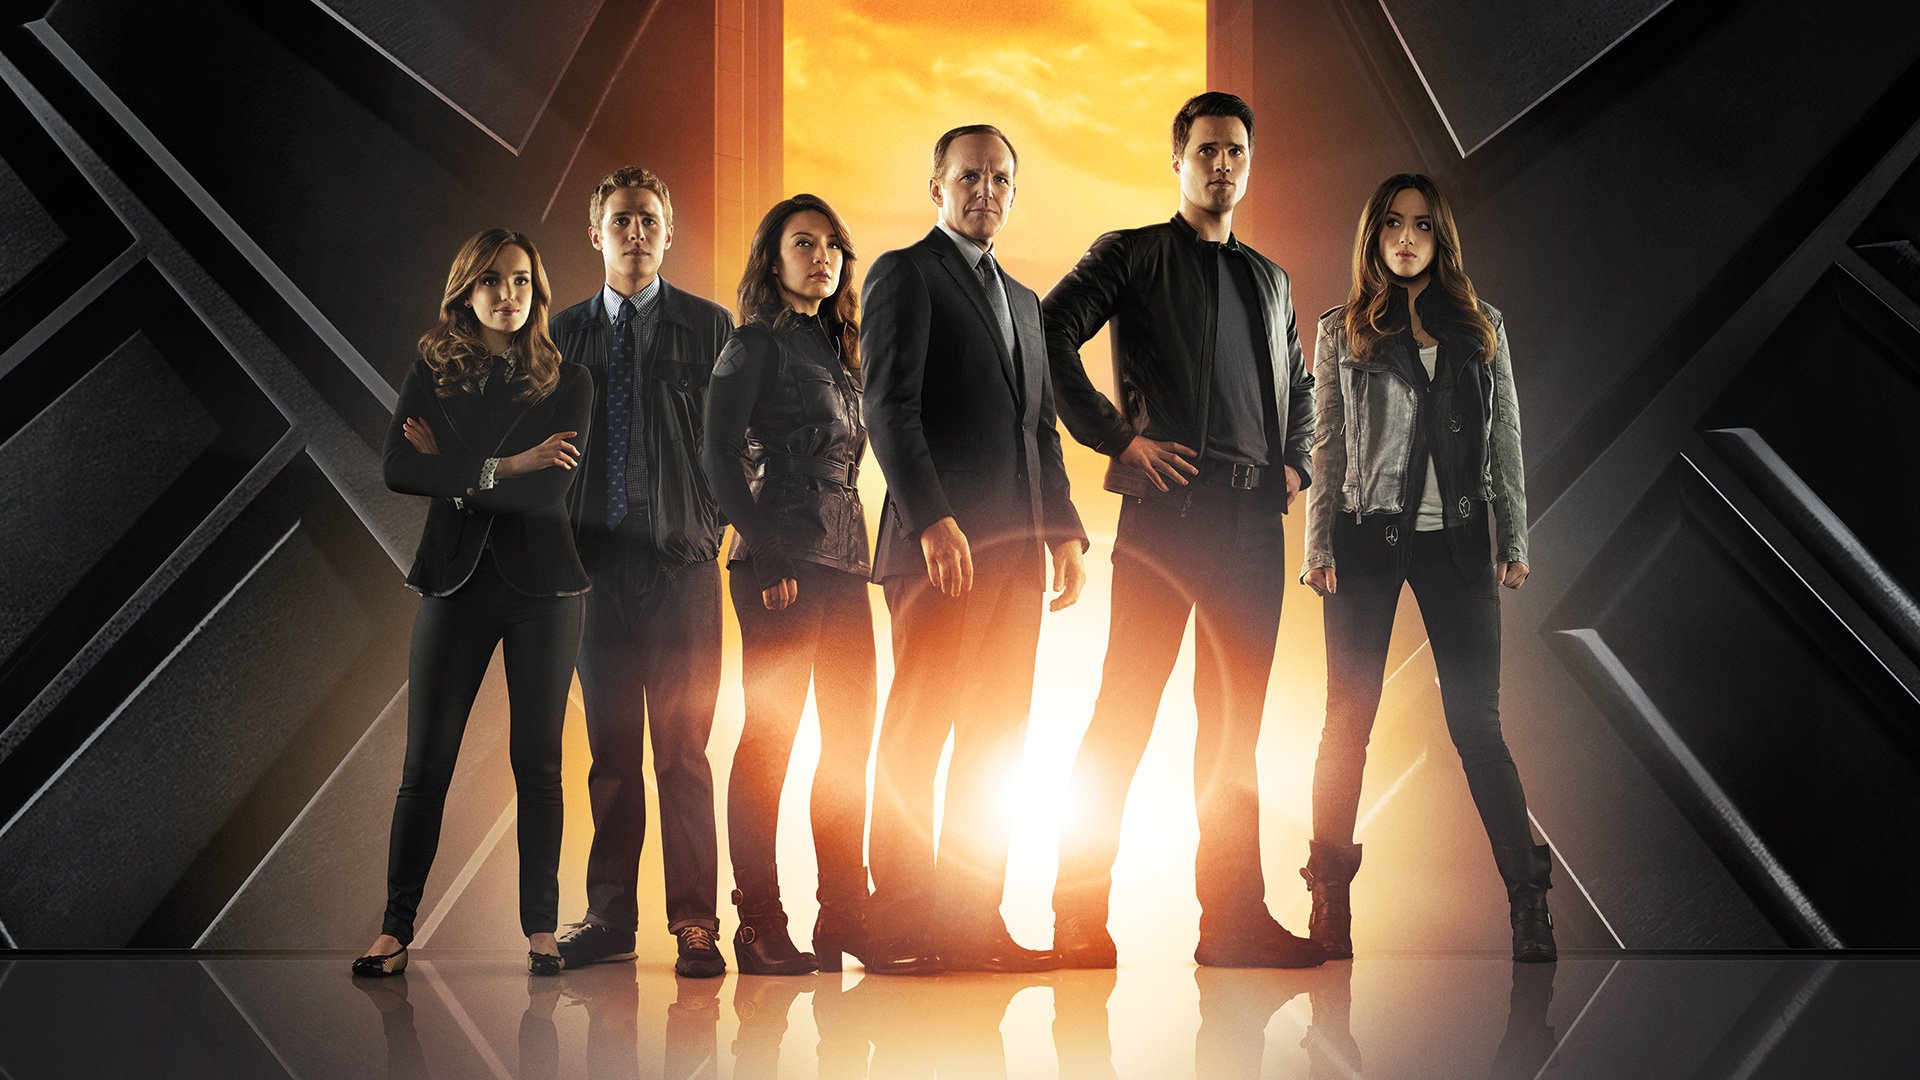 To paraphrase Forrest Gump Watching AGENTS OF SHIELD is like a box